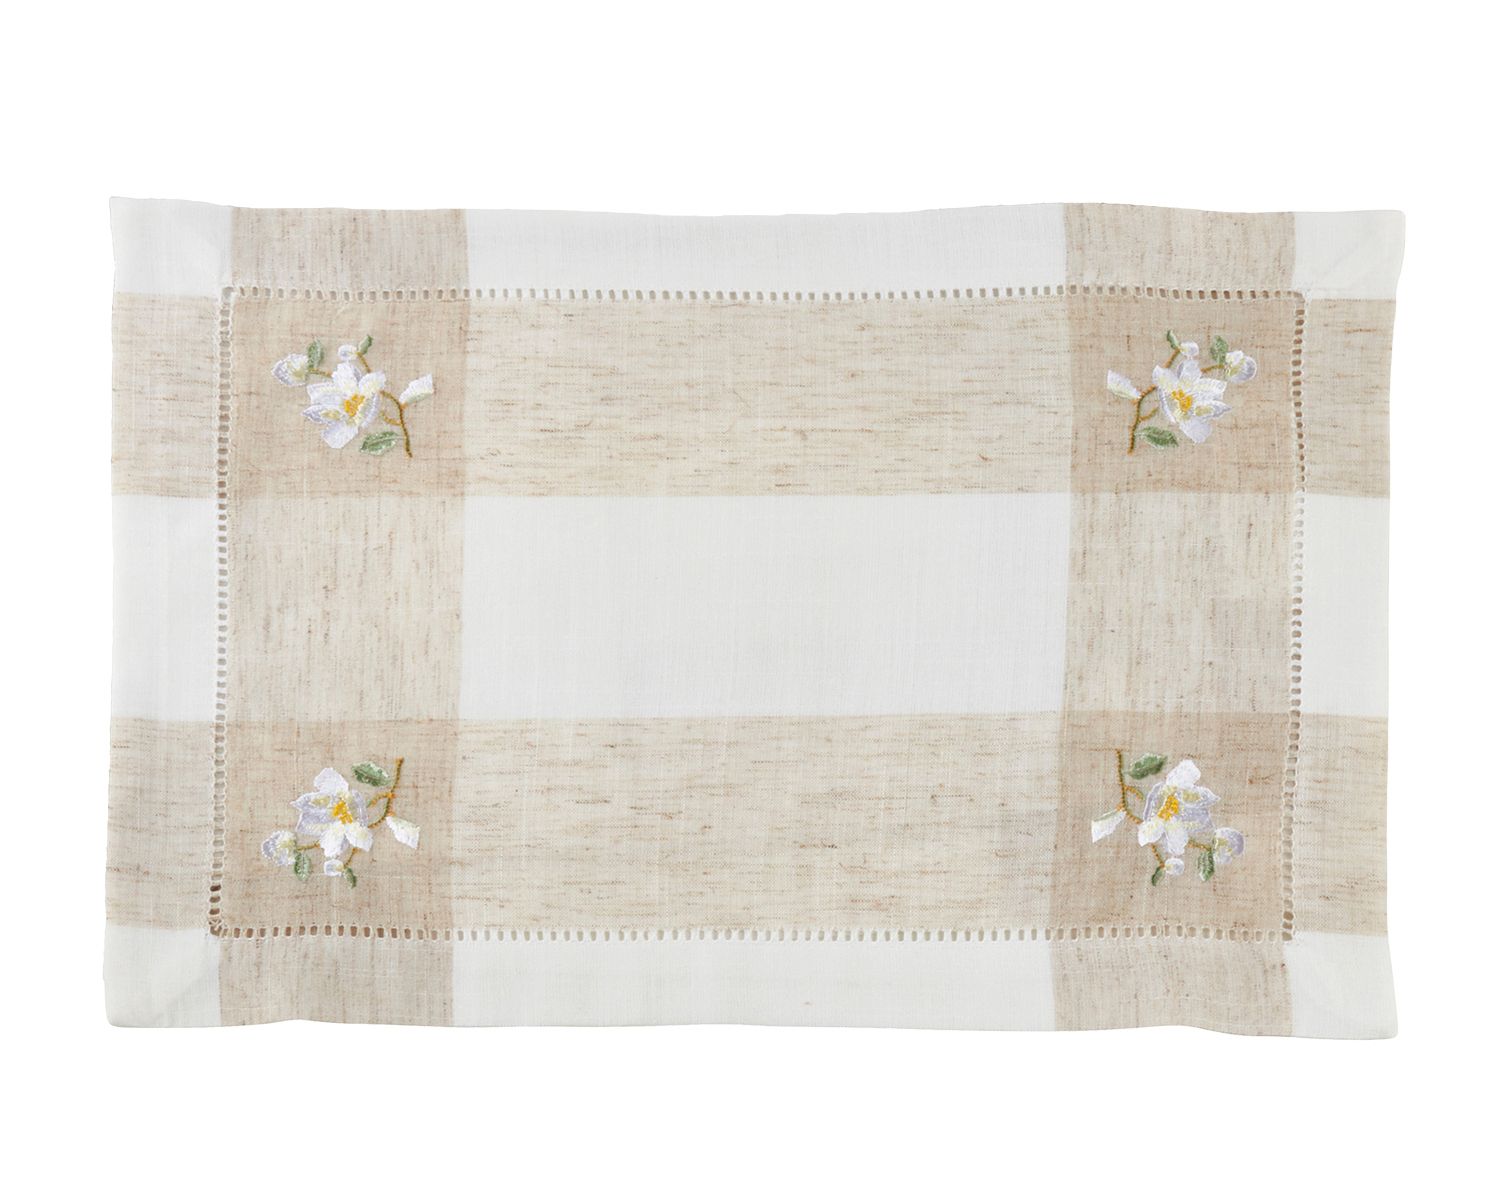 Fennco Styles Hommage Brodé Collection Cottage Magnolia Embroidery  Hemstitch Border Linen Blend 14 X 19 Inch Placemats – Ivory Placemats For  Wedding, Within Brode Ceramic Garden Stools (View 23 of 25)